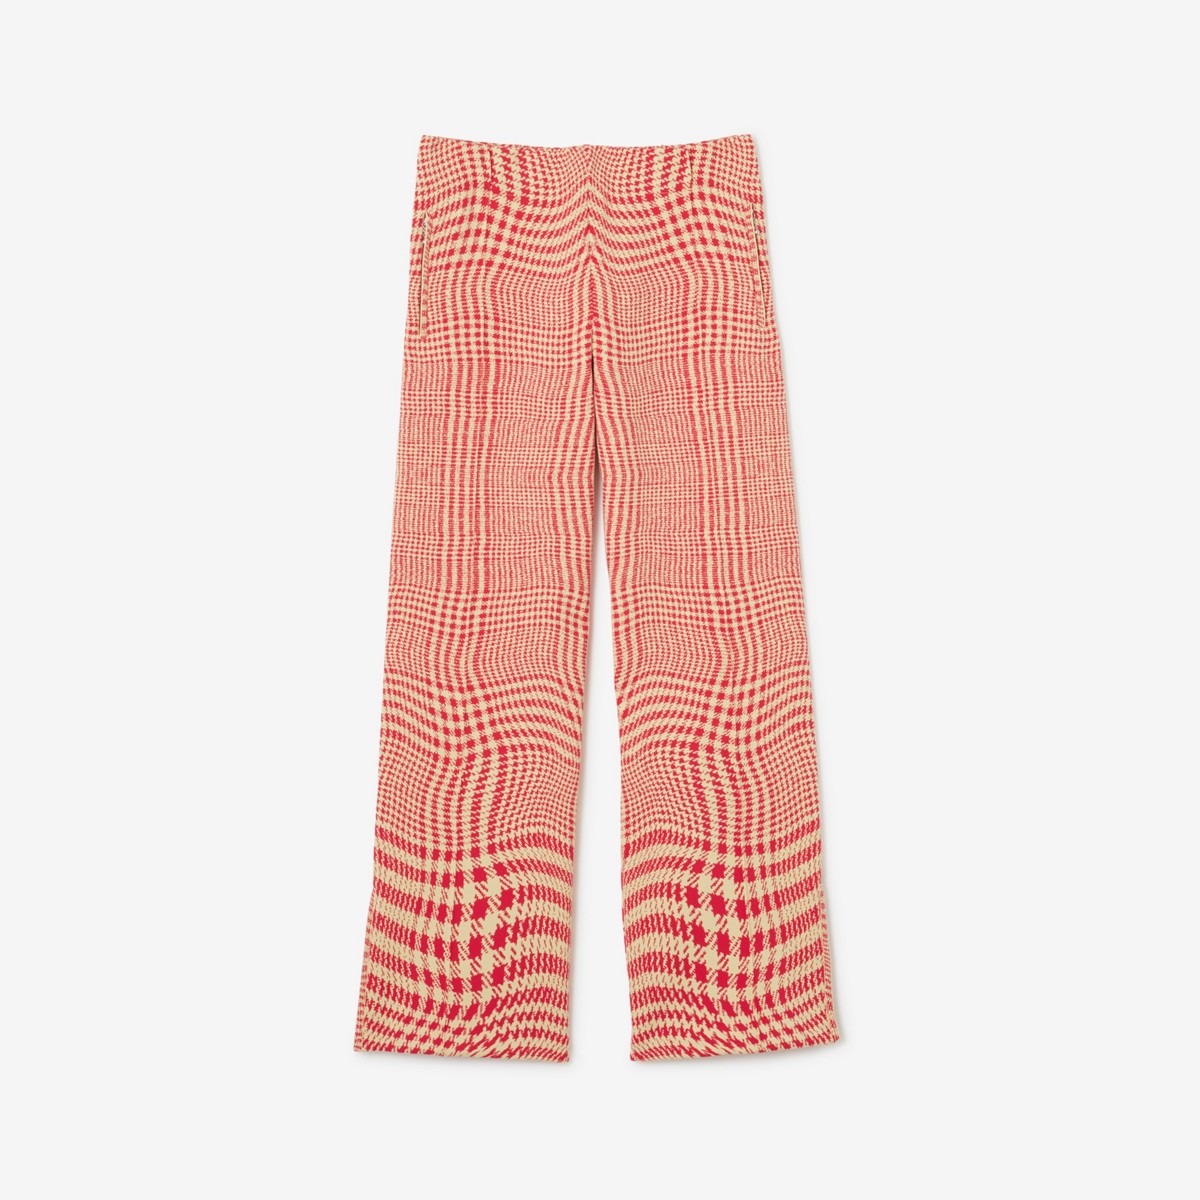 Burberry Warped Houndstooth Nylon Blend Track Pants In Pillar